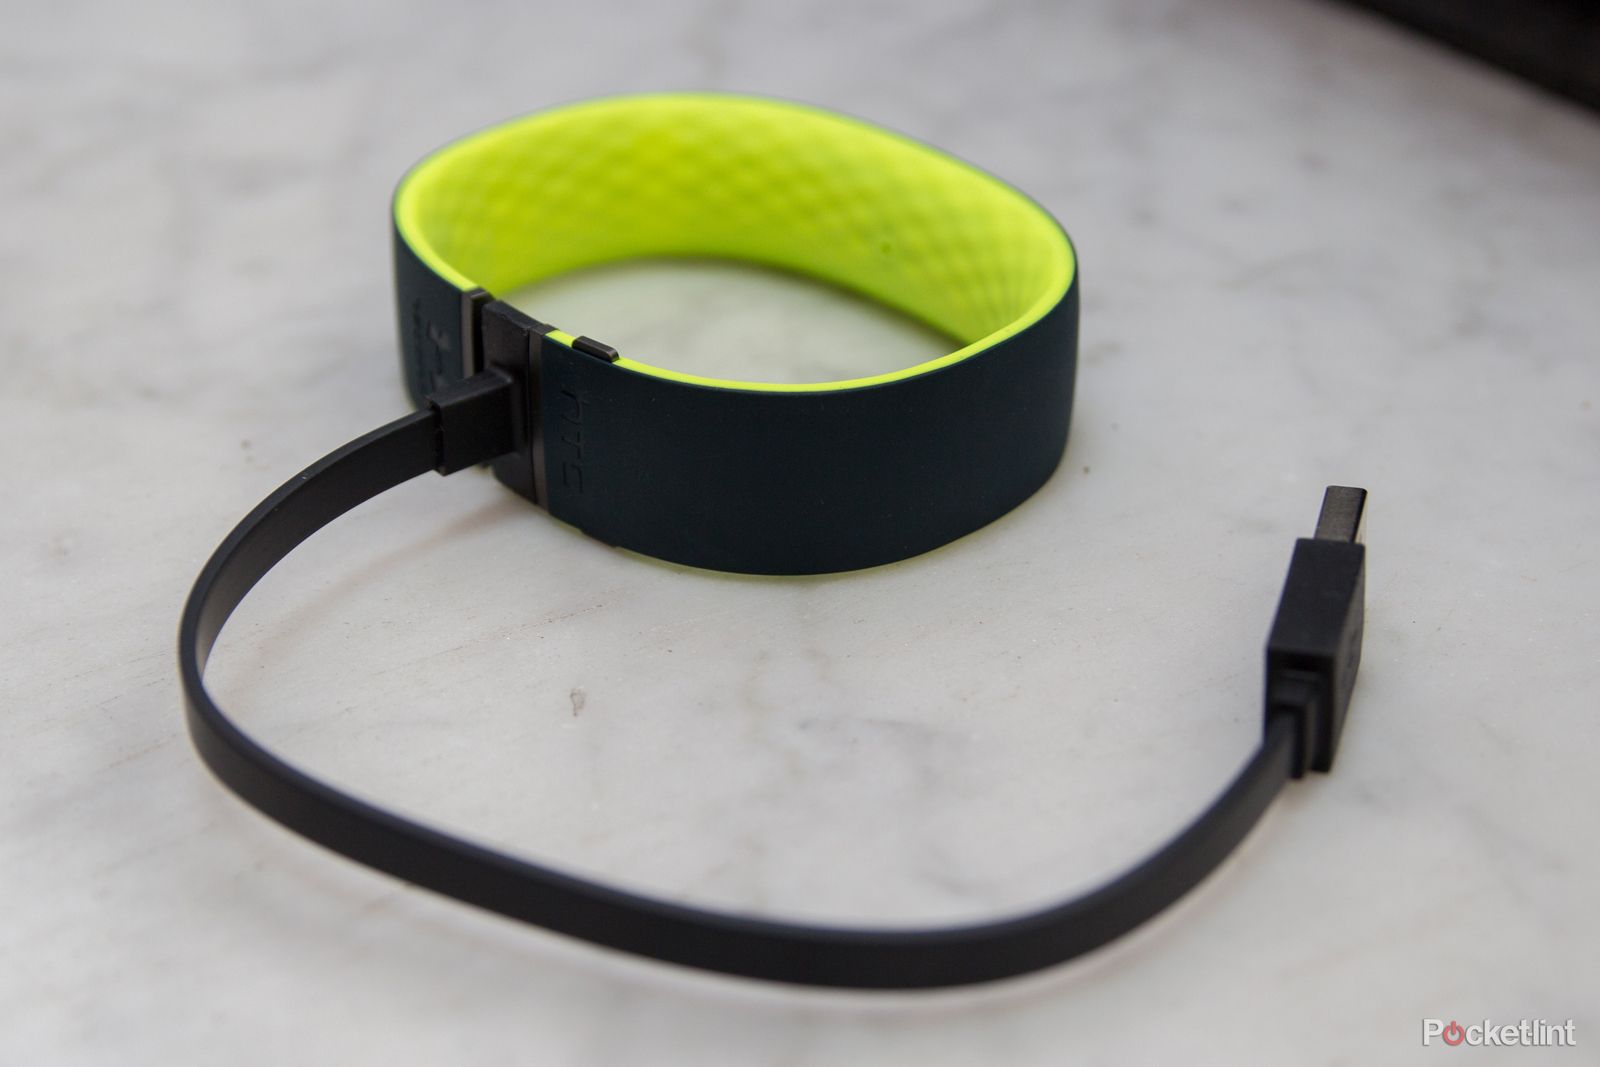 htc grip gps sports tracker is the first child of the under armour and htc union image 15